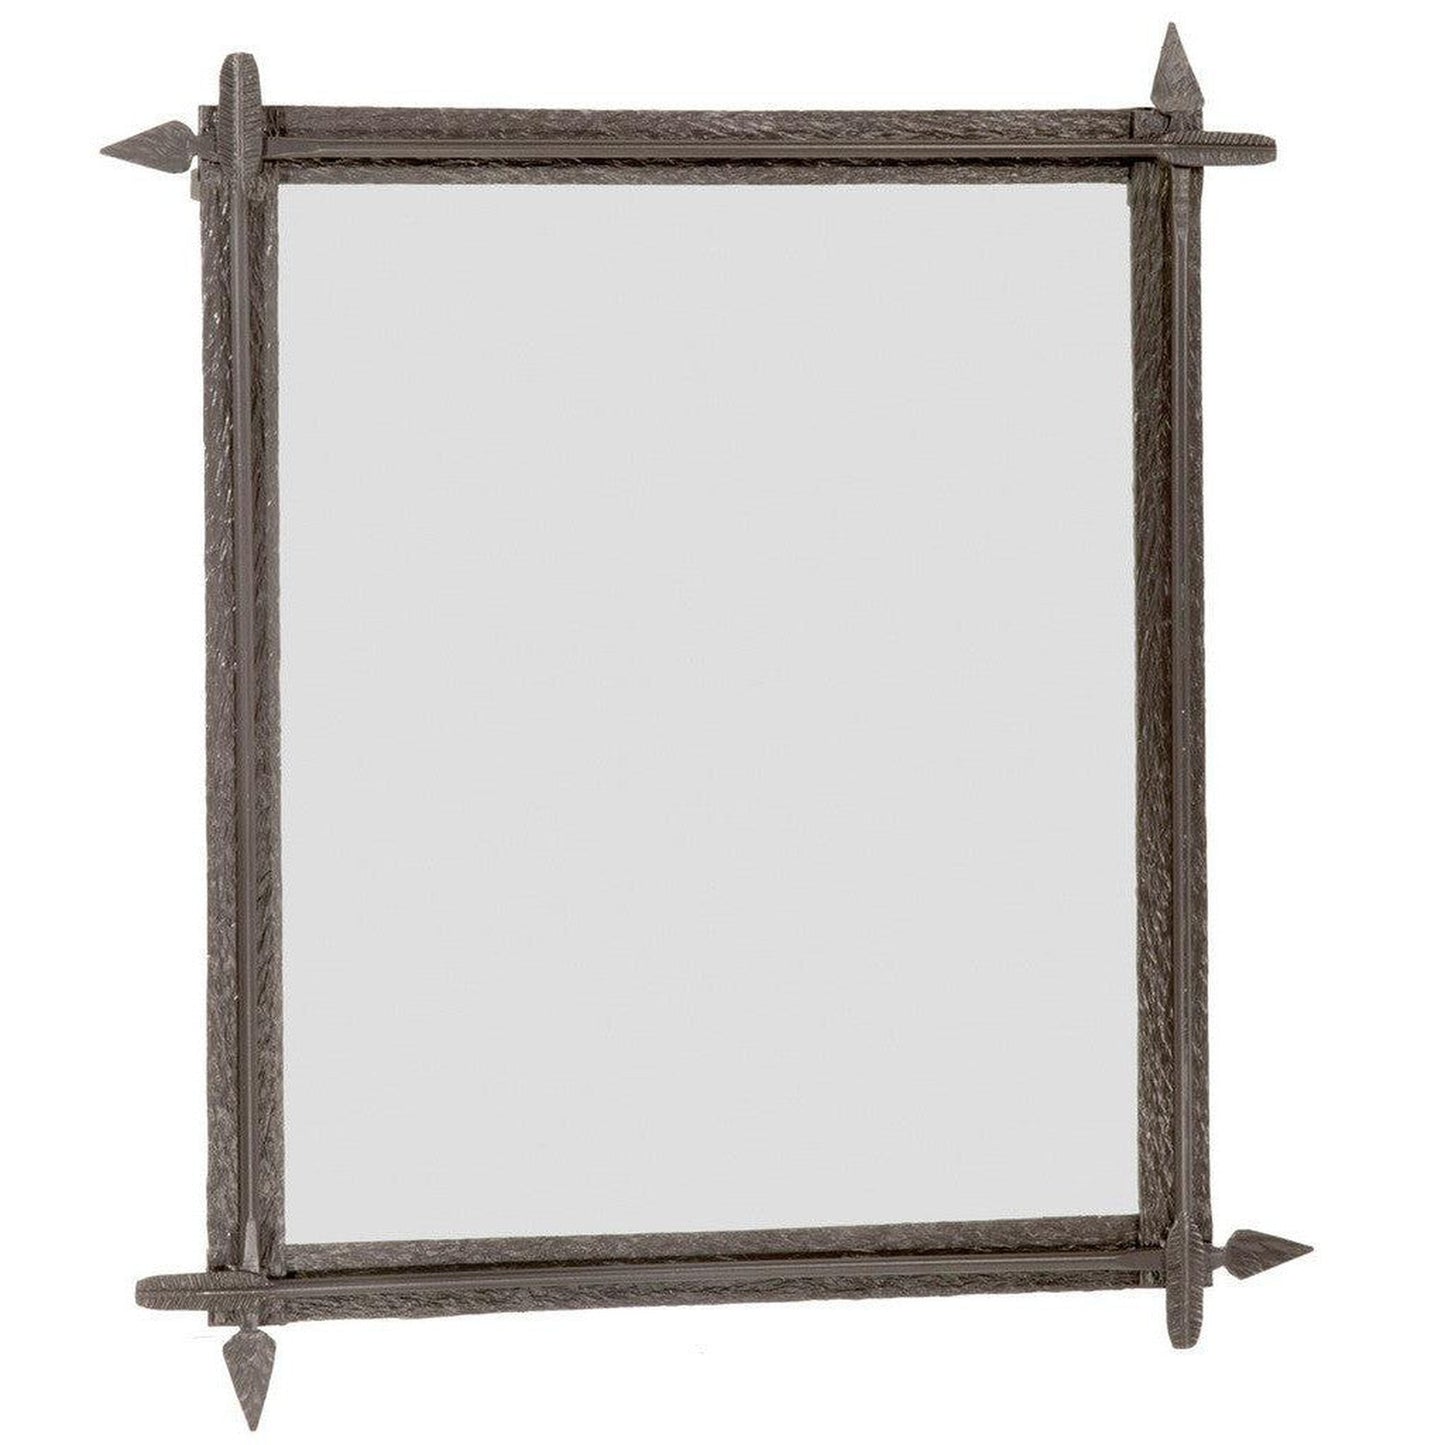 Stone County Ironworks Quapaw 31" x 43" Large Hand Rubbed Pewter Iron Wall Mirror With Copper Iron Accent